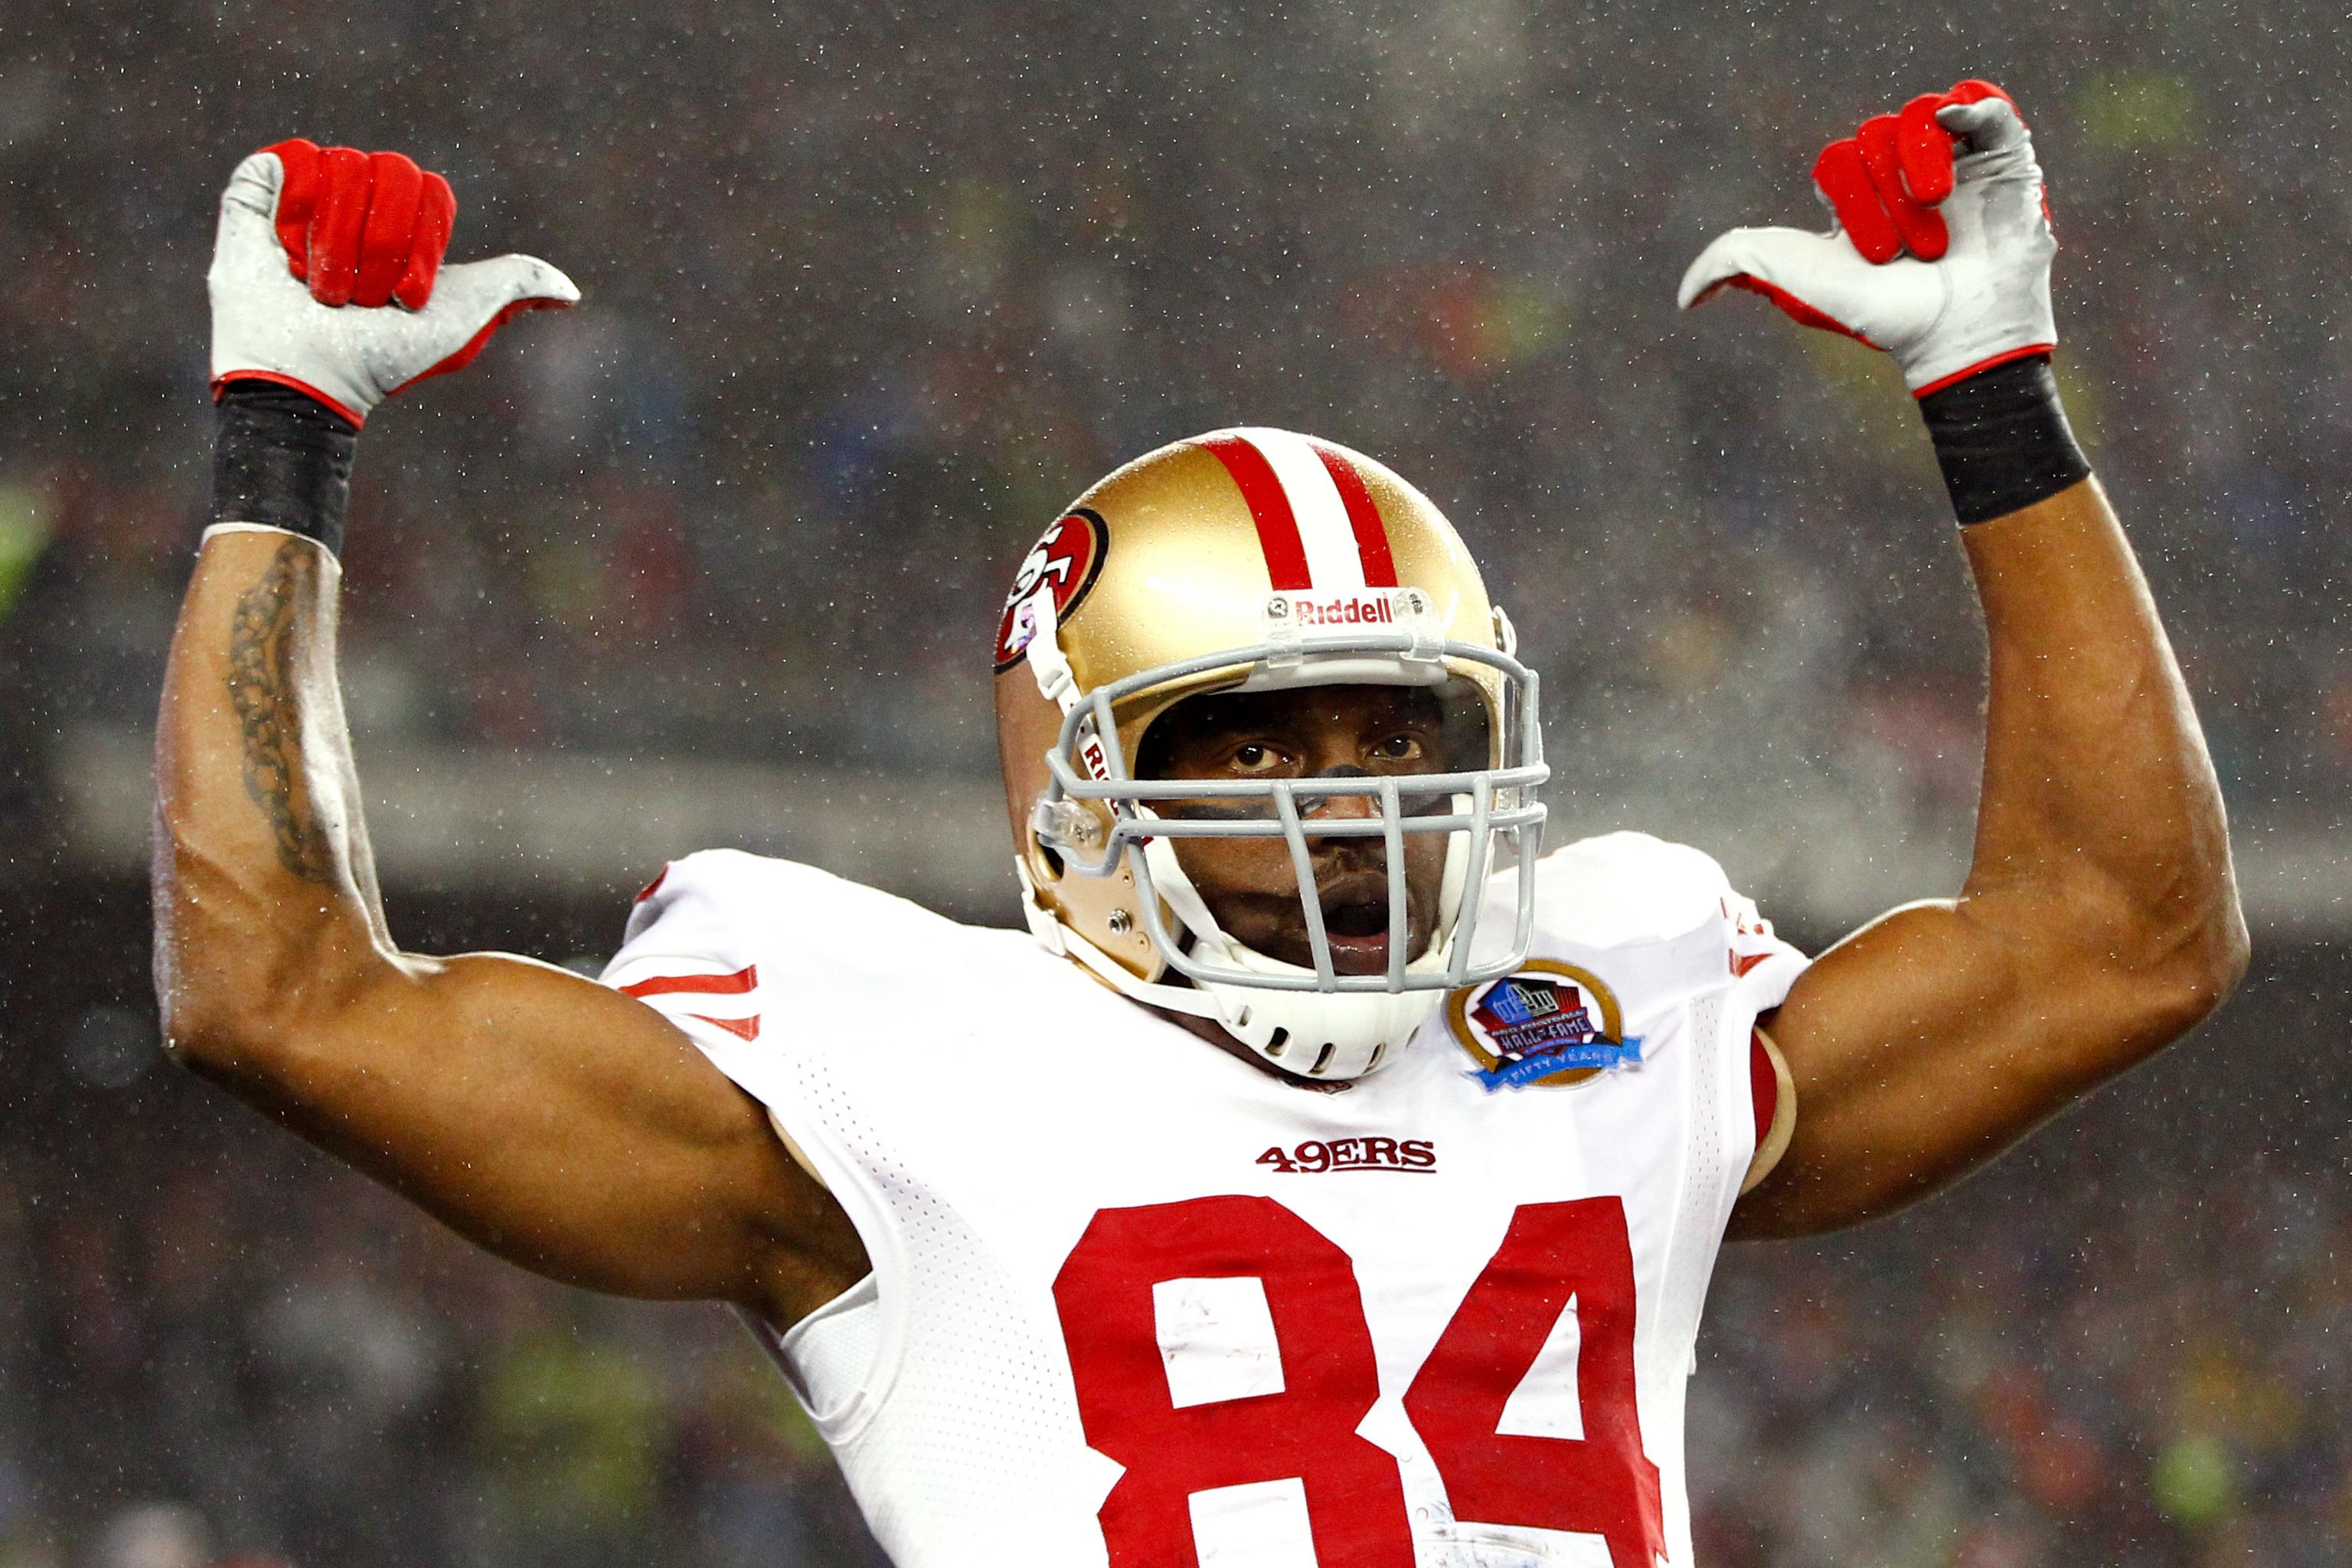 Grading the 49ers' and Ravens' Special Super Bowl Uniforms